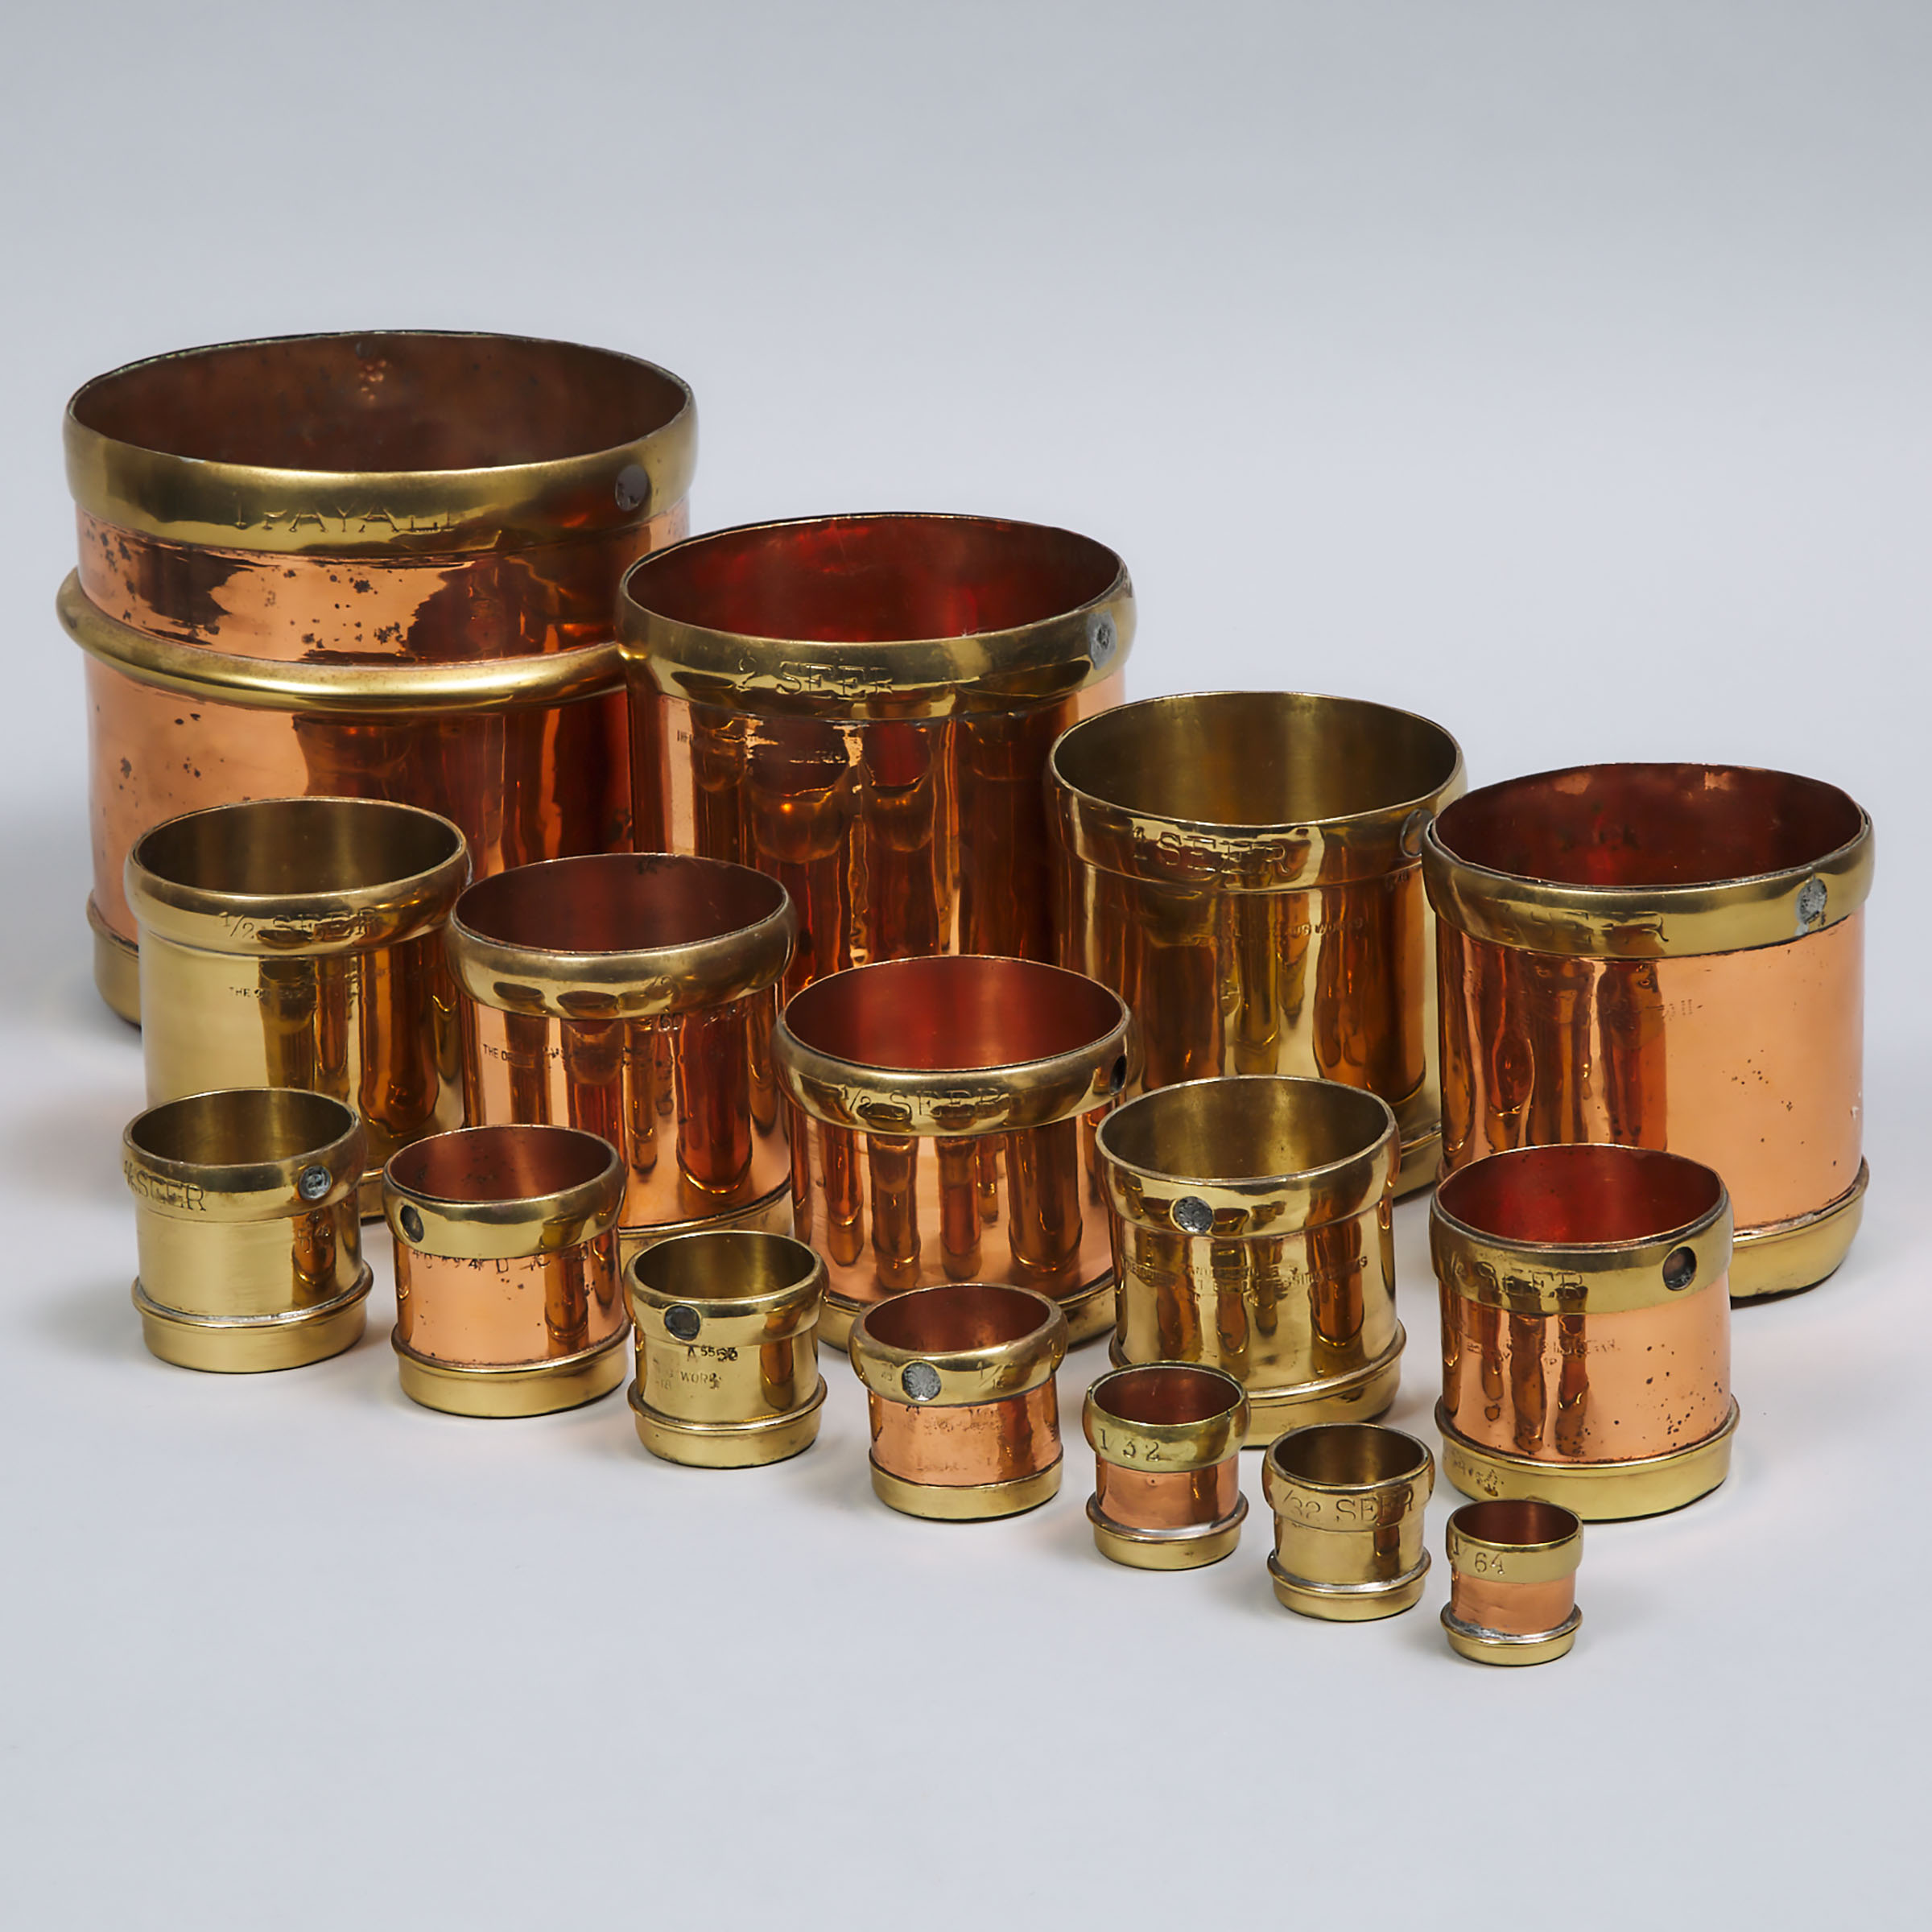 Two Graduated Sets of Copper and Brass Seer Measures,  The Oriental Pressing Works, Bombay, India, 19th/early 20th century